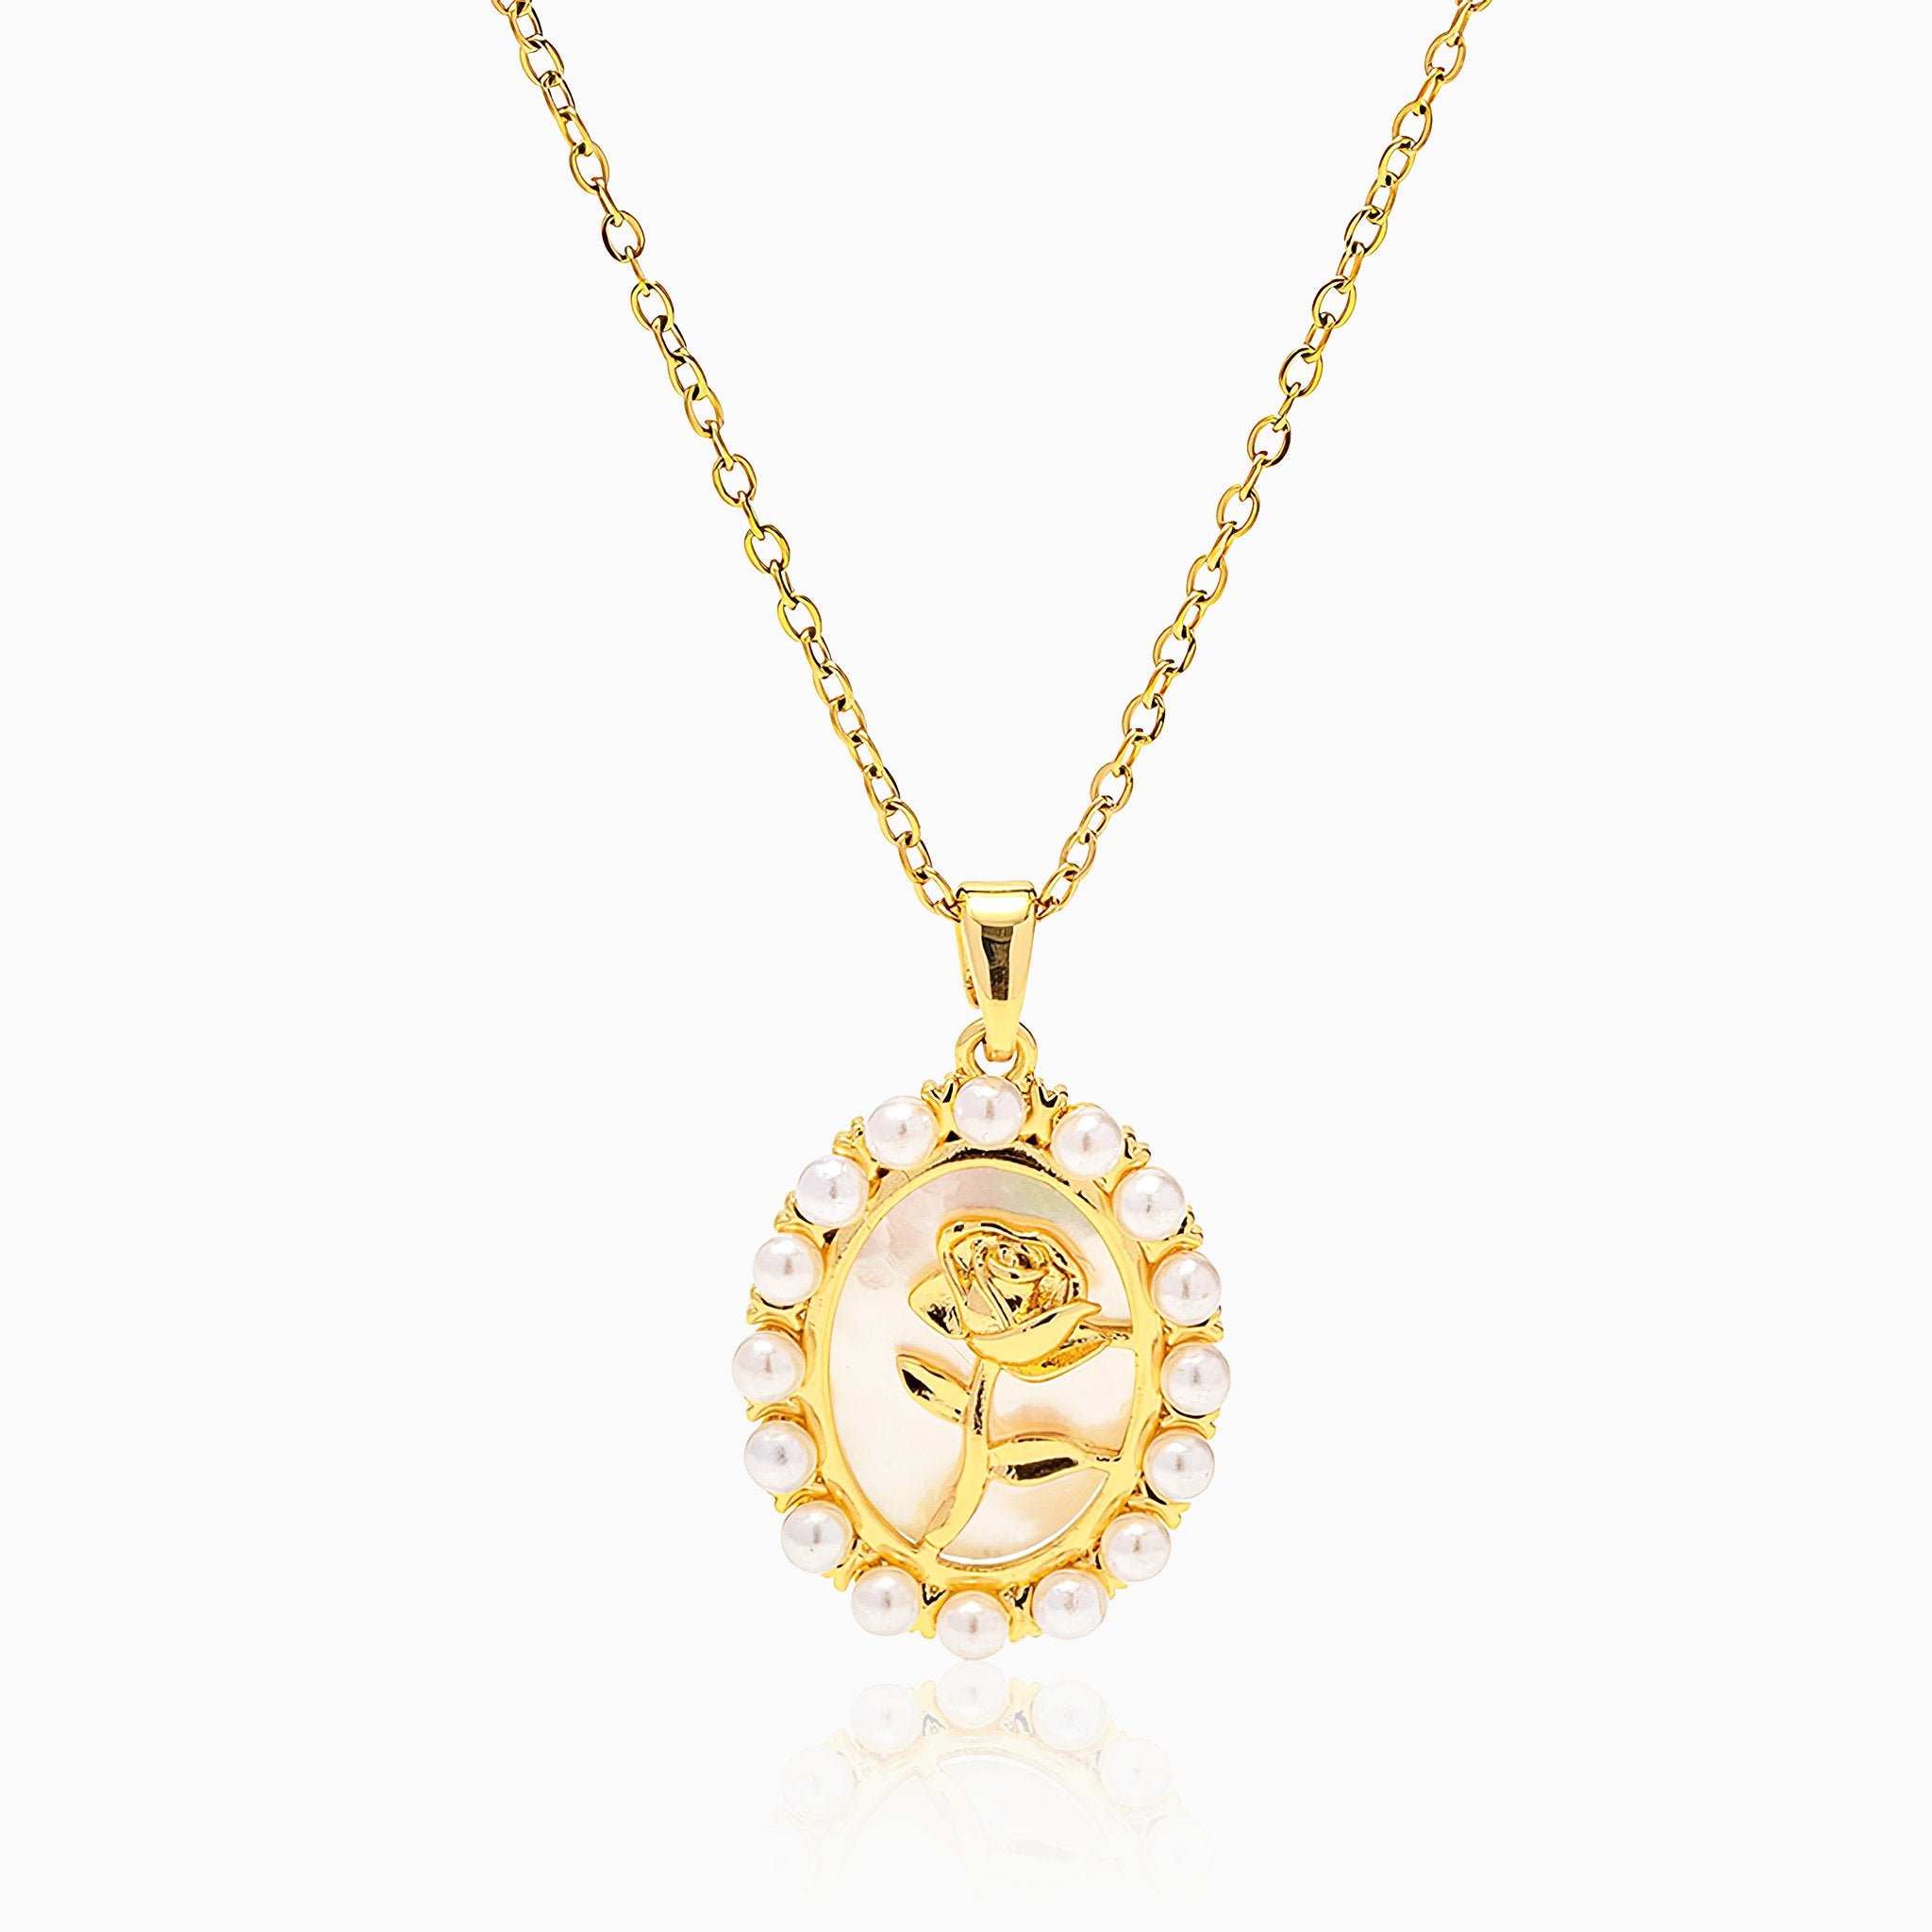 Inlaid Pearl Flower Pendant Necklace - Nobbier - Necklace - 18K Gold And Titanium PVD Coated Jewelry